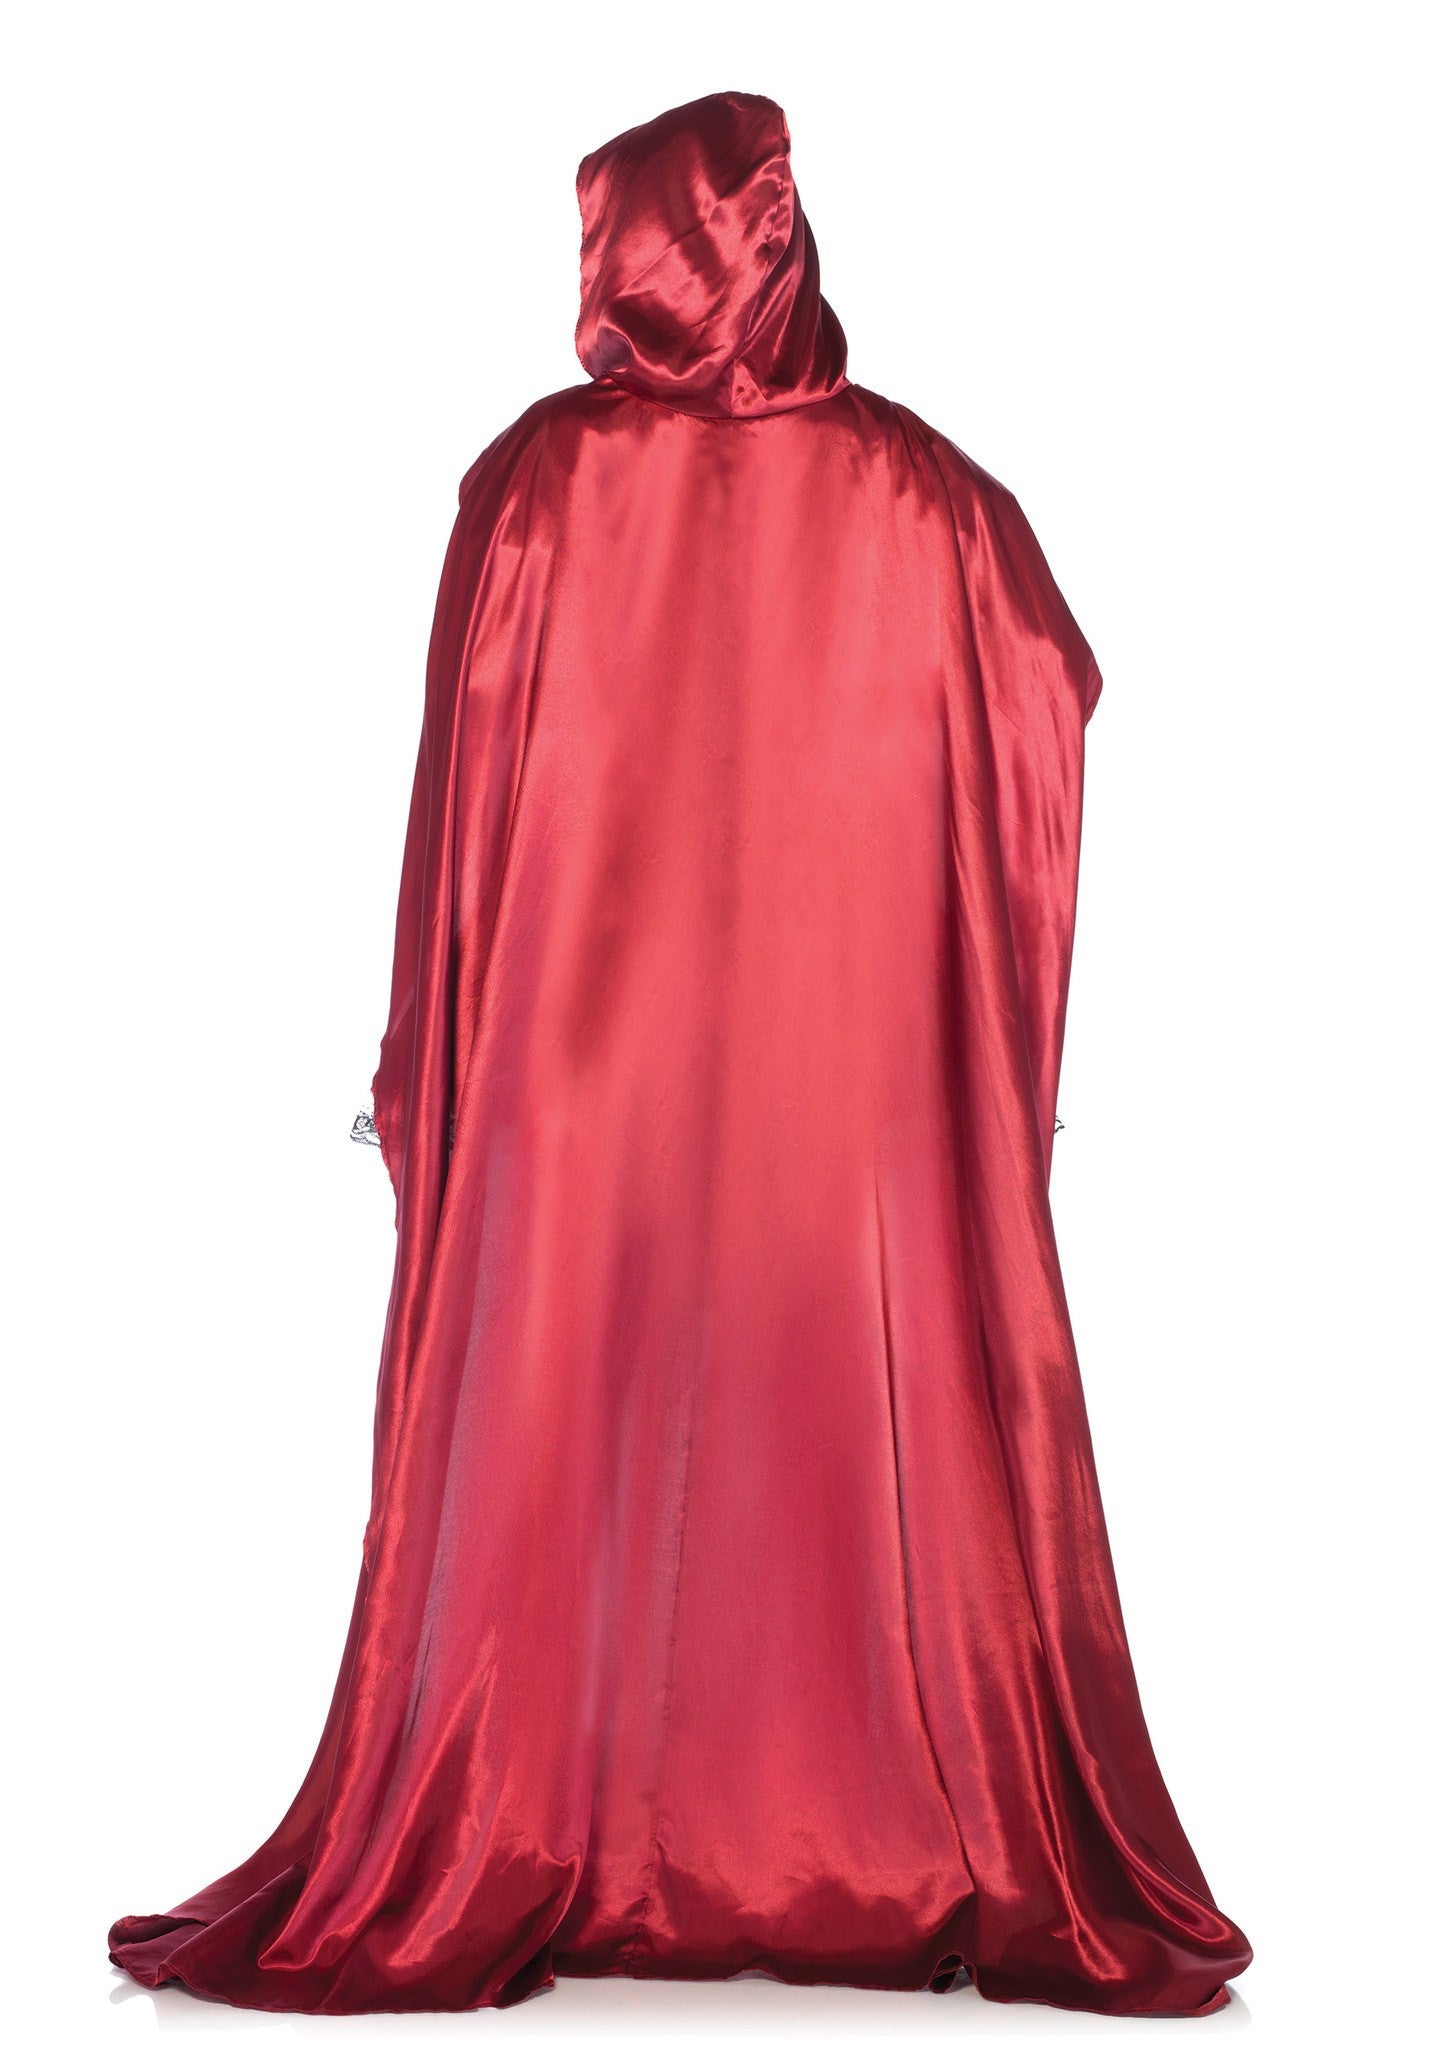 Captivating Miss Red Riding Hood Costume - Little Red Riding Hood